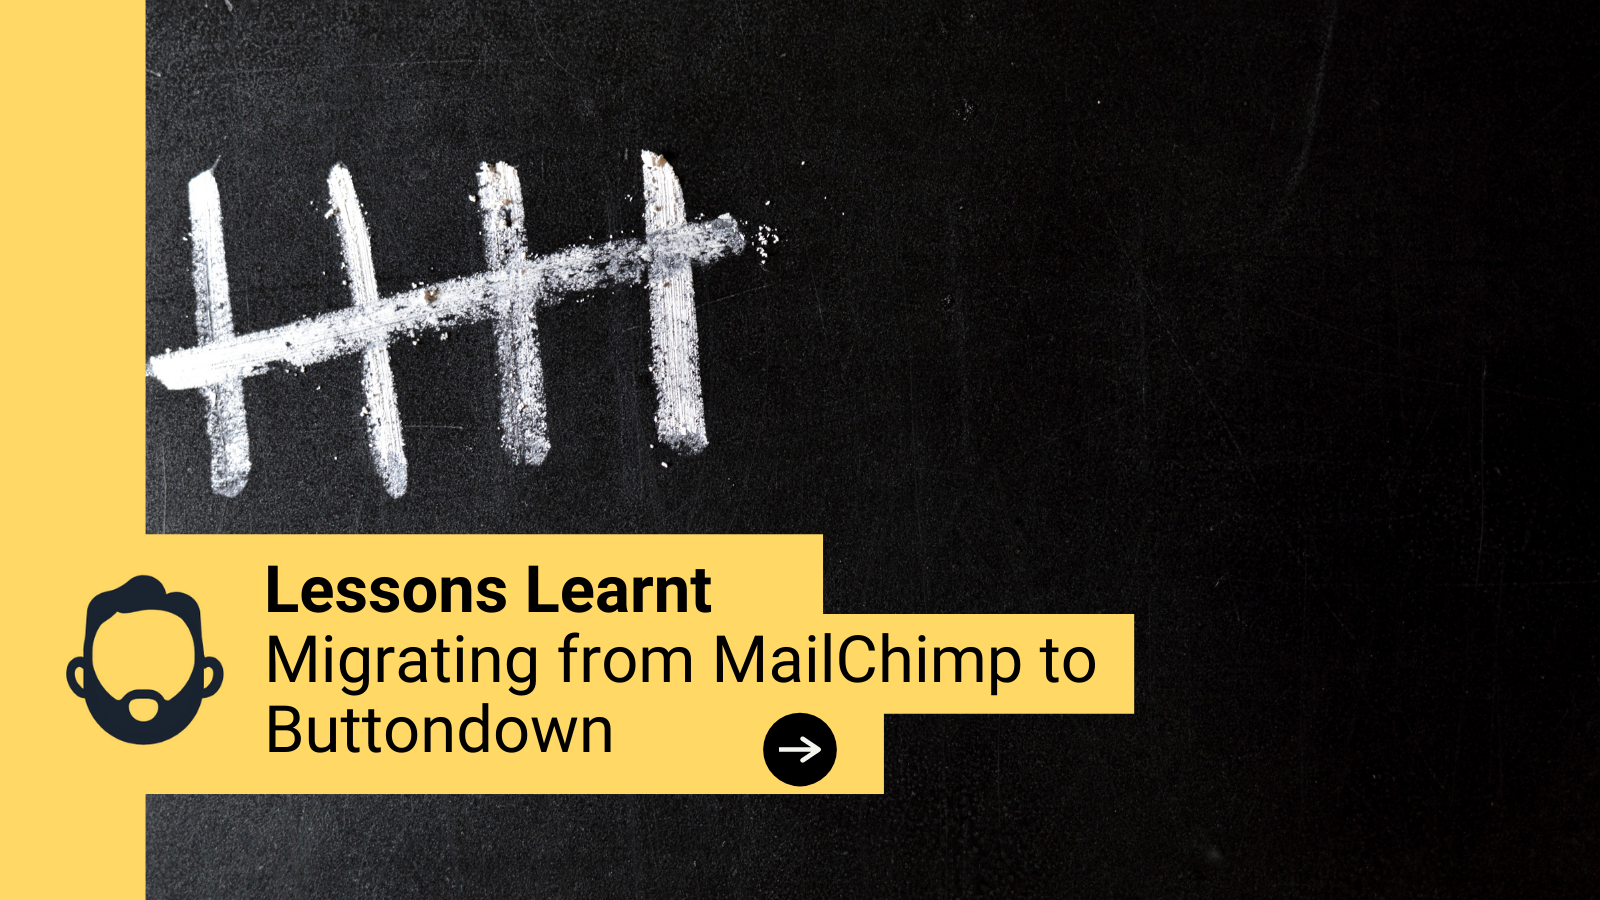 Lessons Learnt migrating from Mailchimp to Buttondown